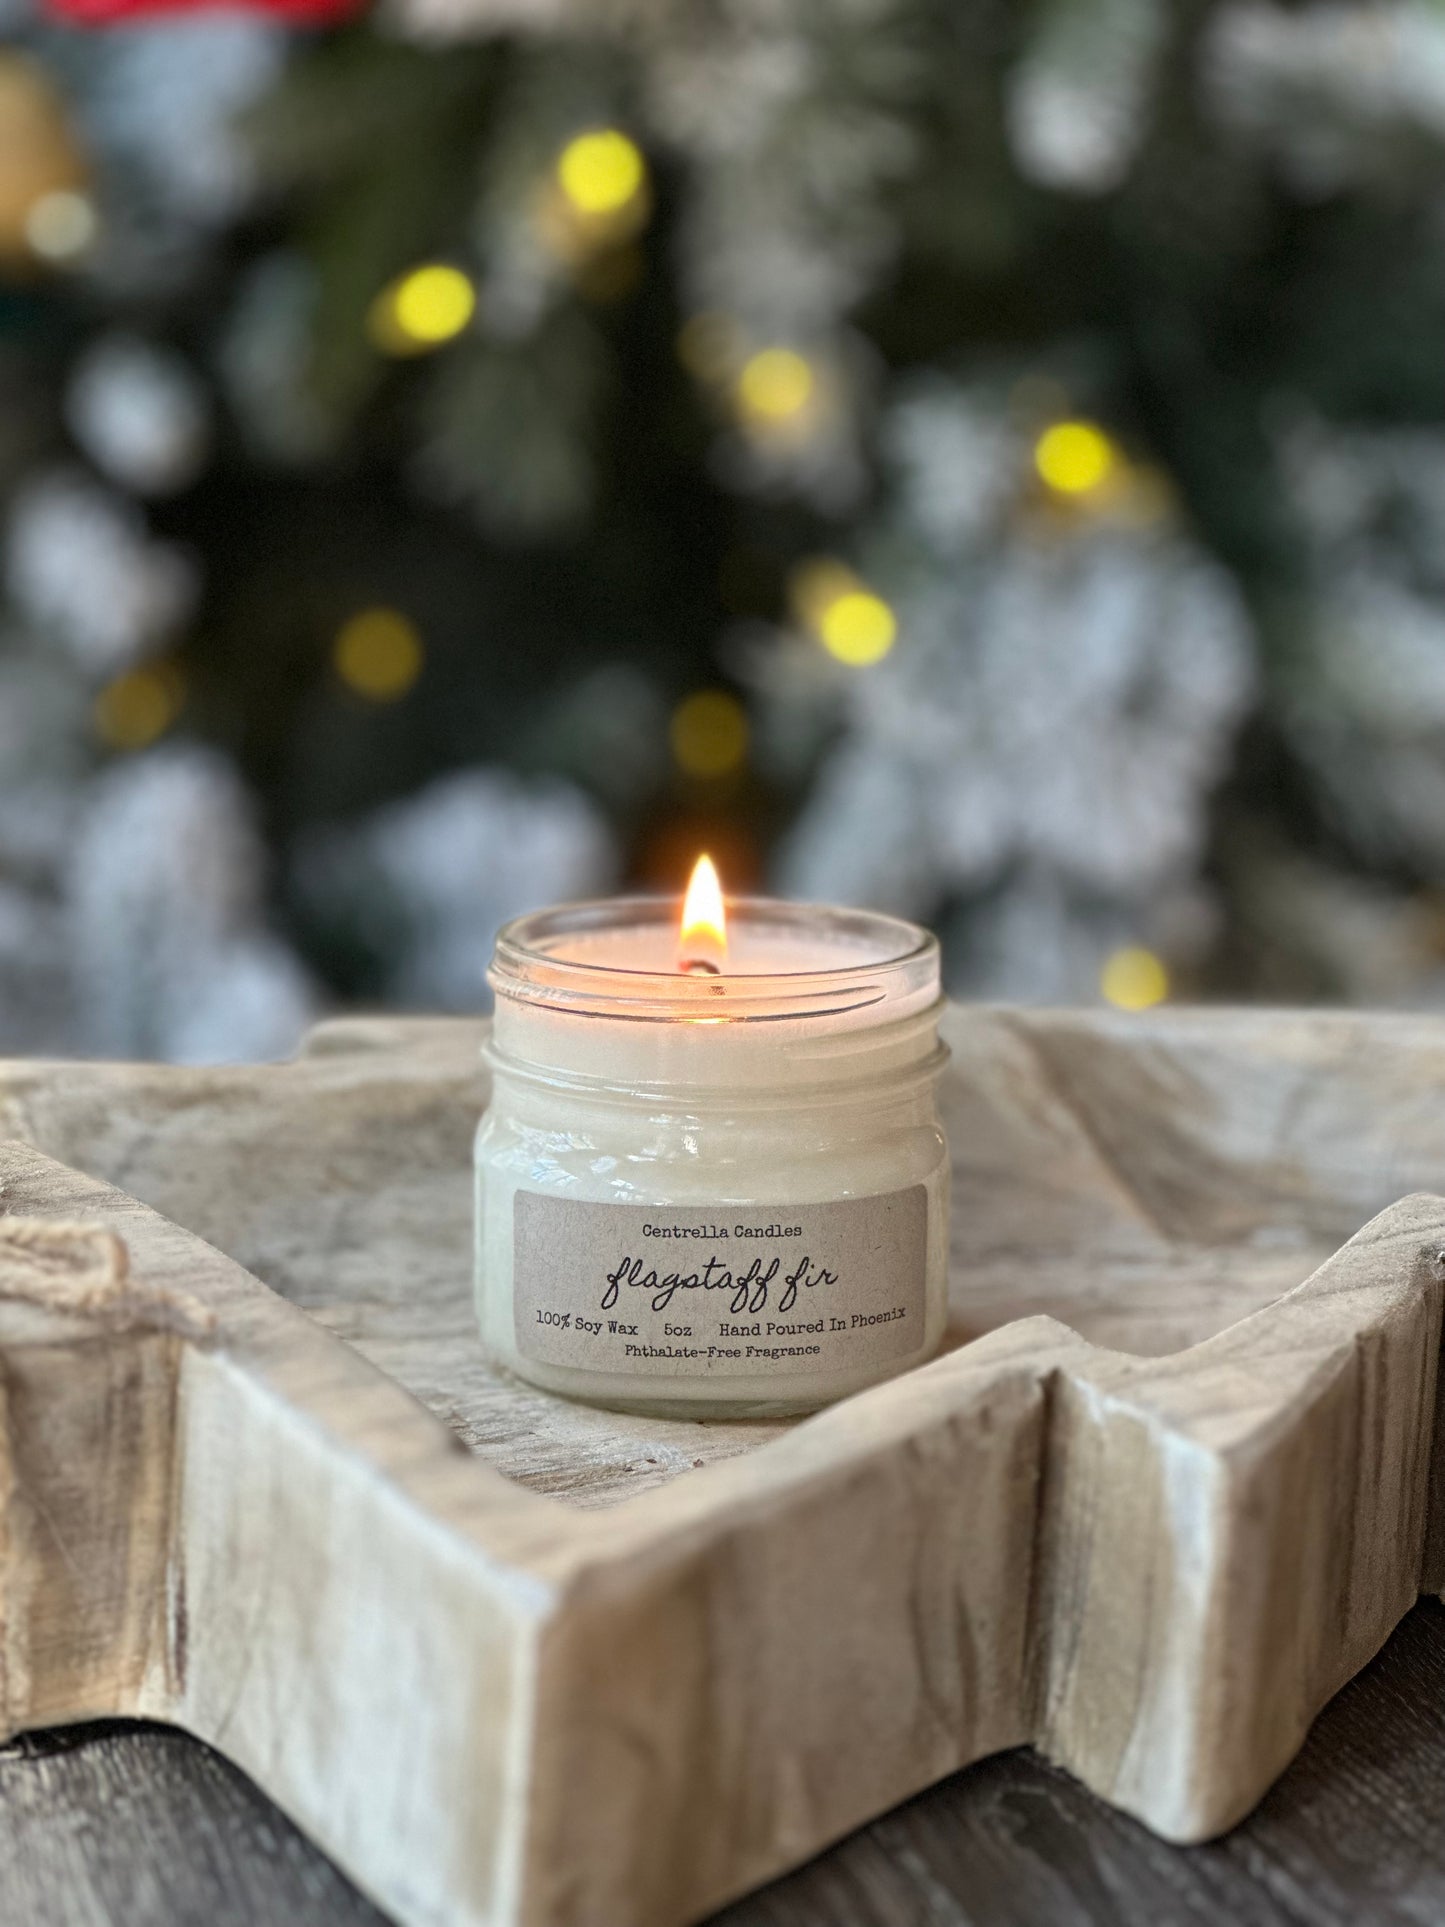 Flagstaff Fir Soy Candle with Lid